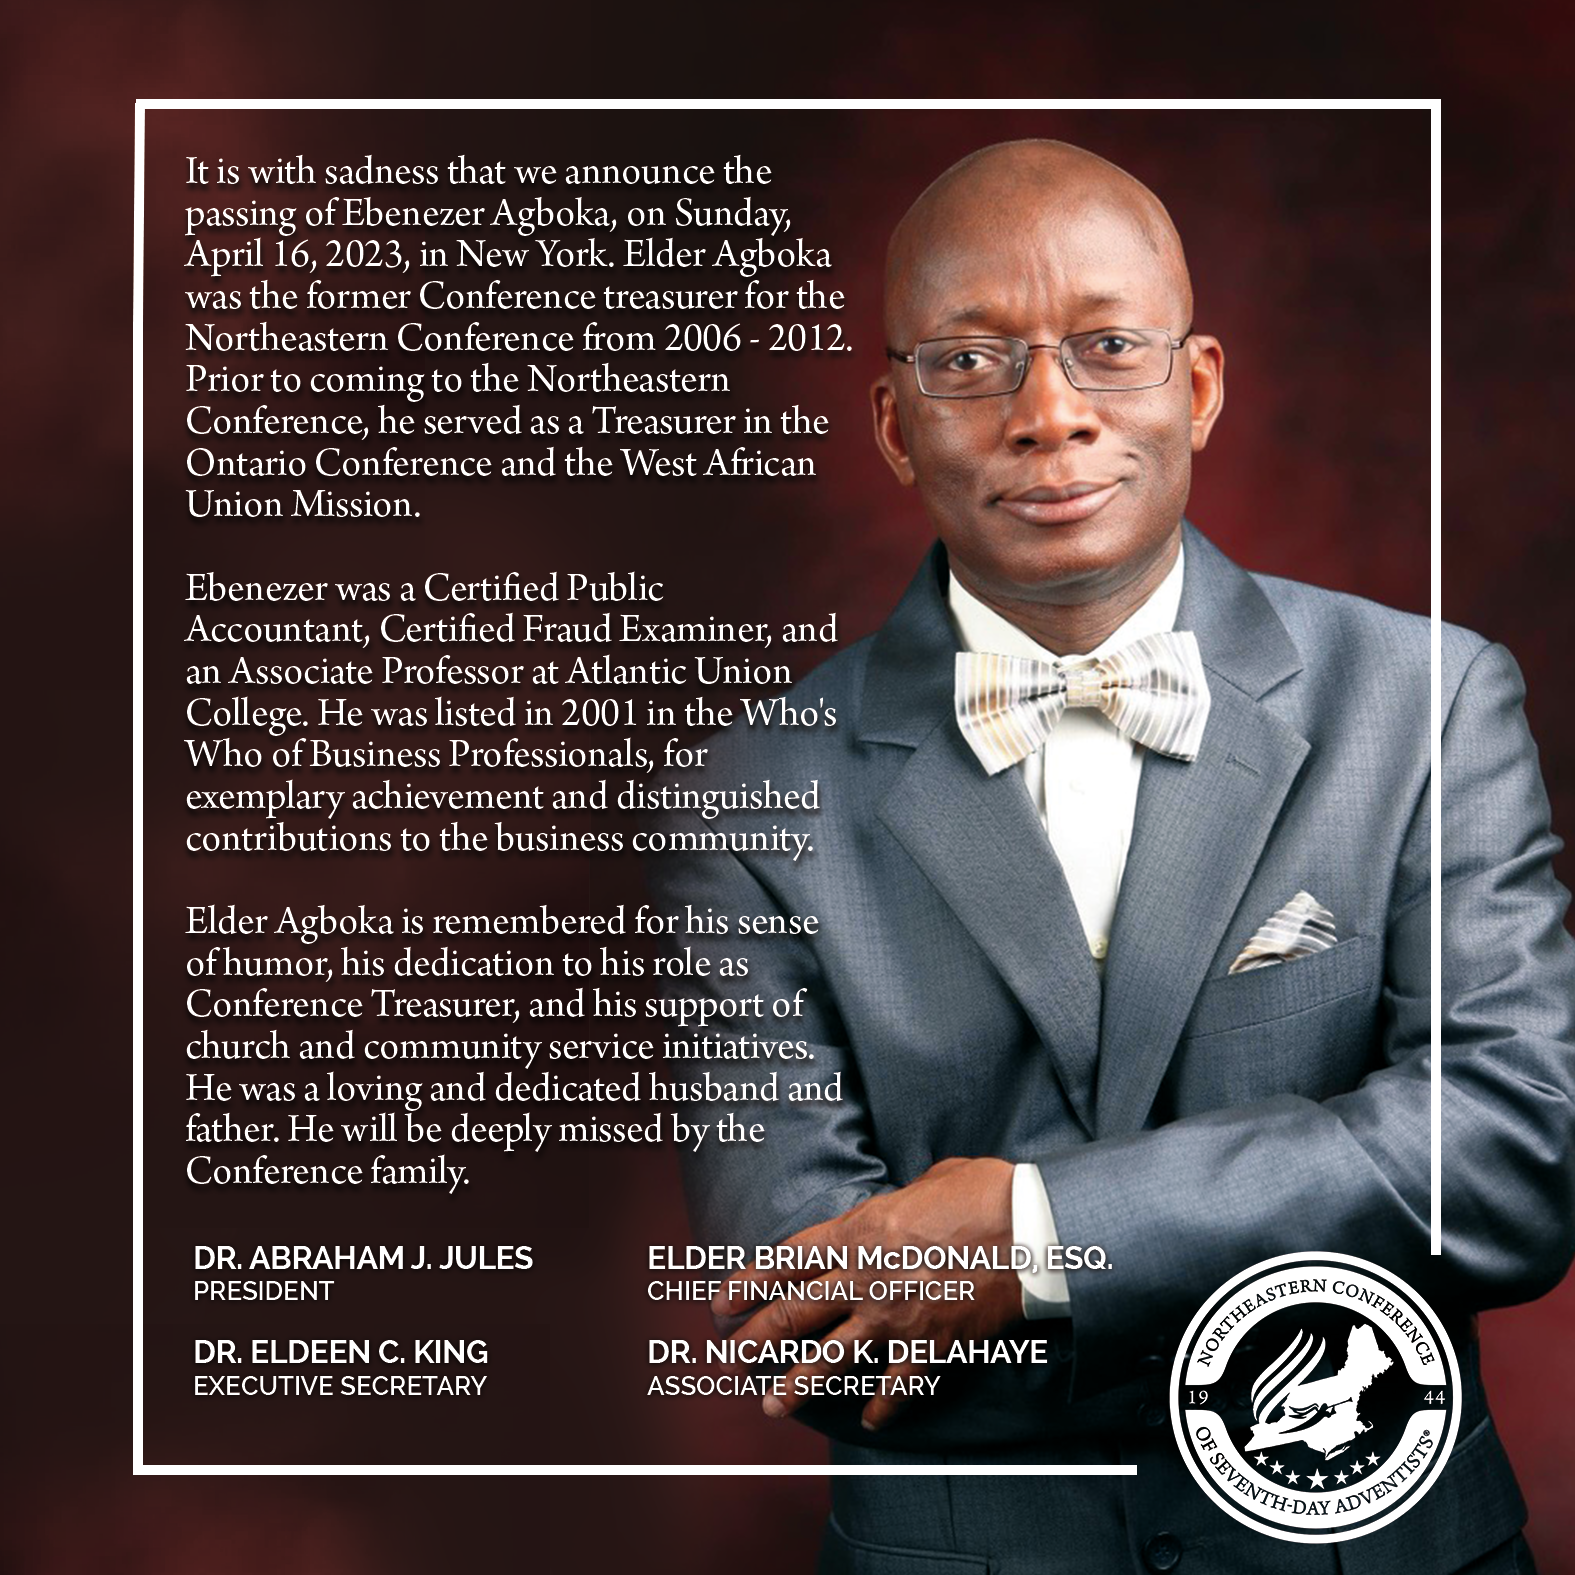 A statement on the passing of Ebenezer Agboka